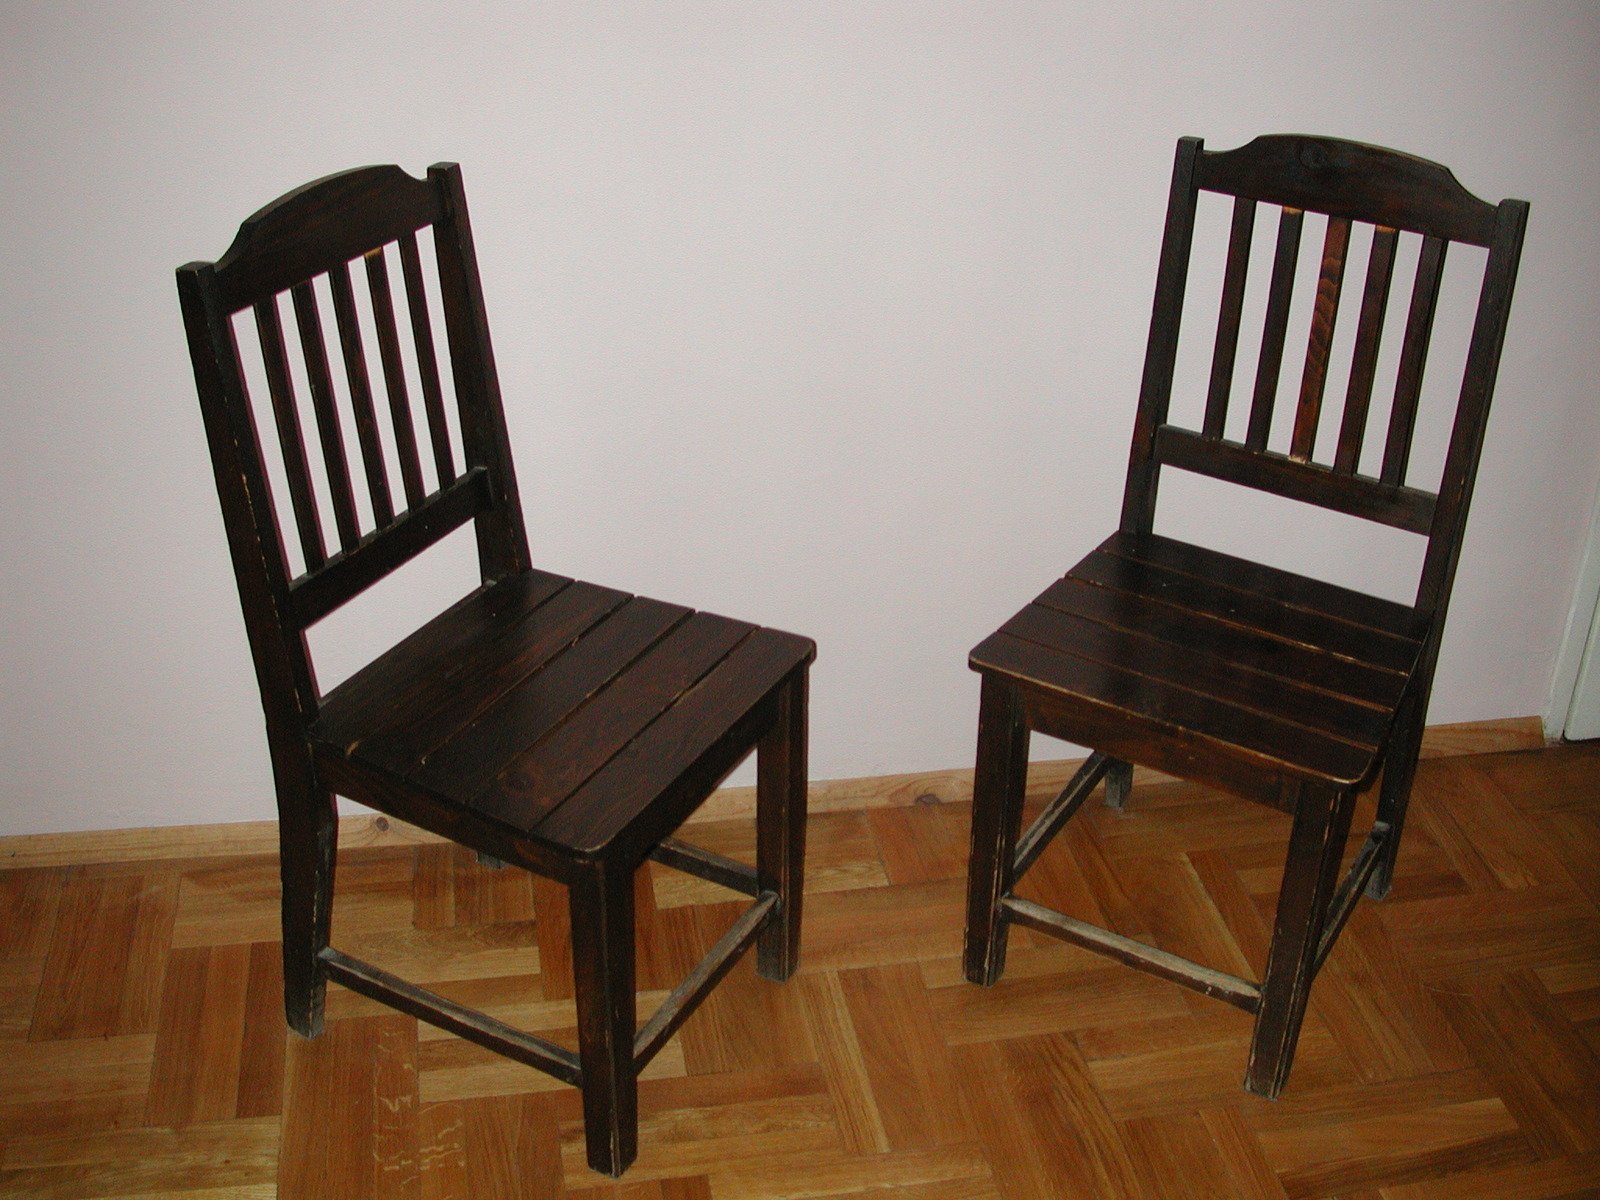 two chairs side by side, one with no legs and one without a back